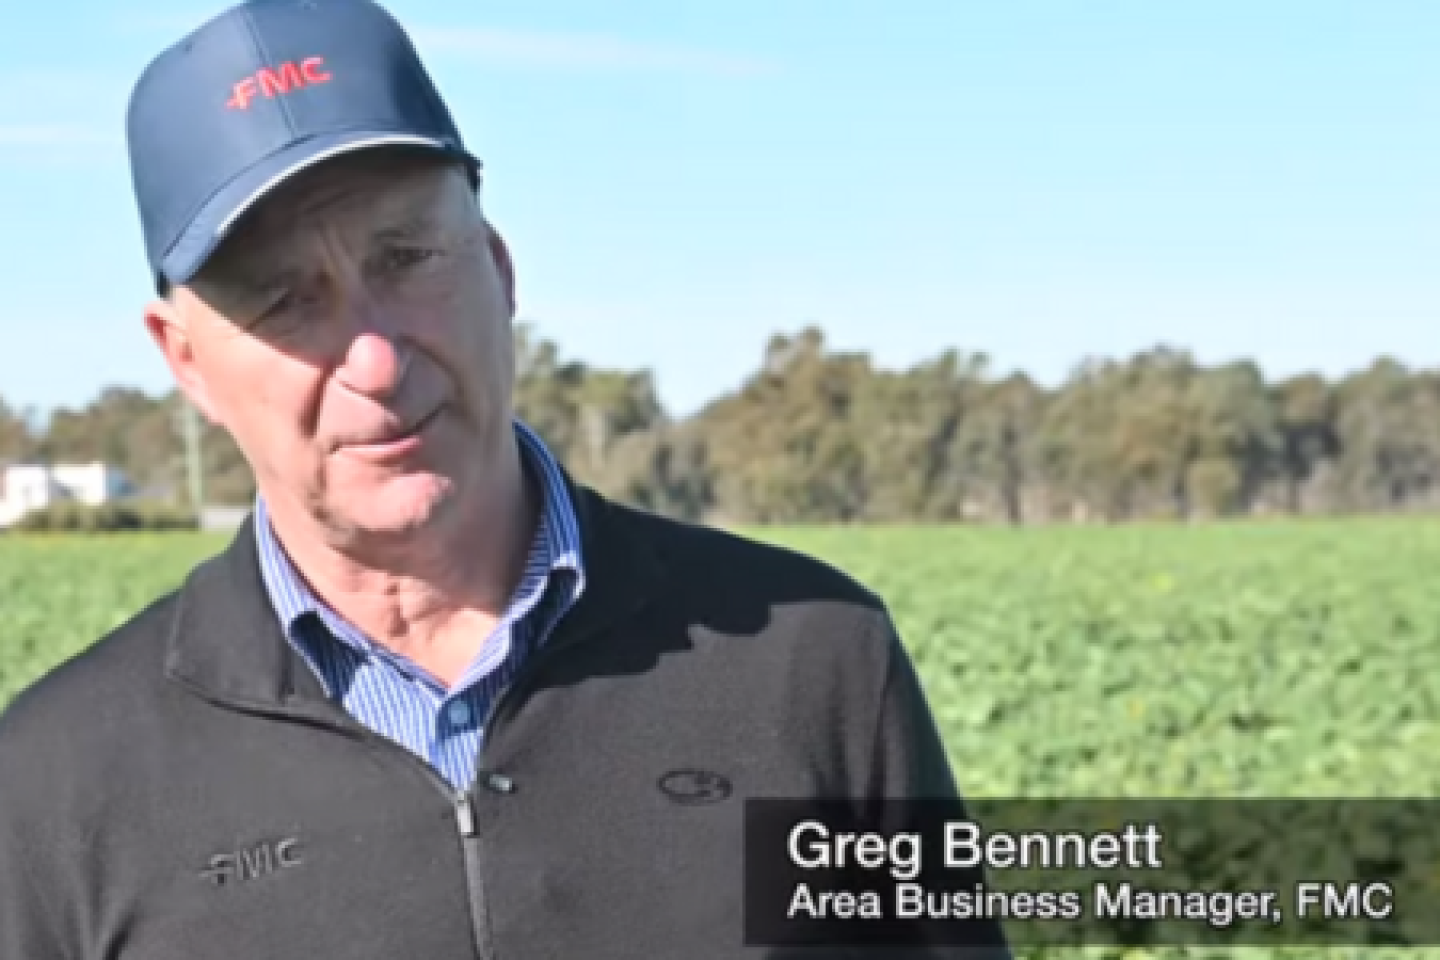 Exirel® Insecticide in Canola